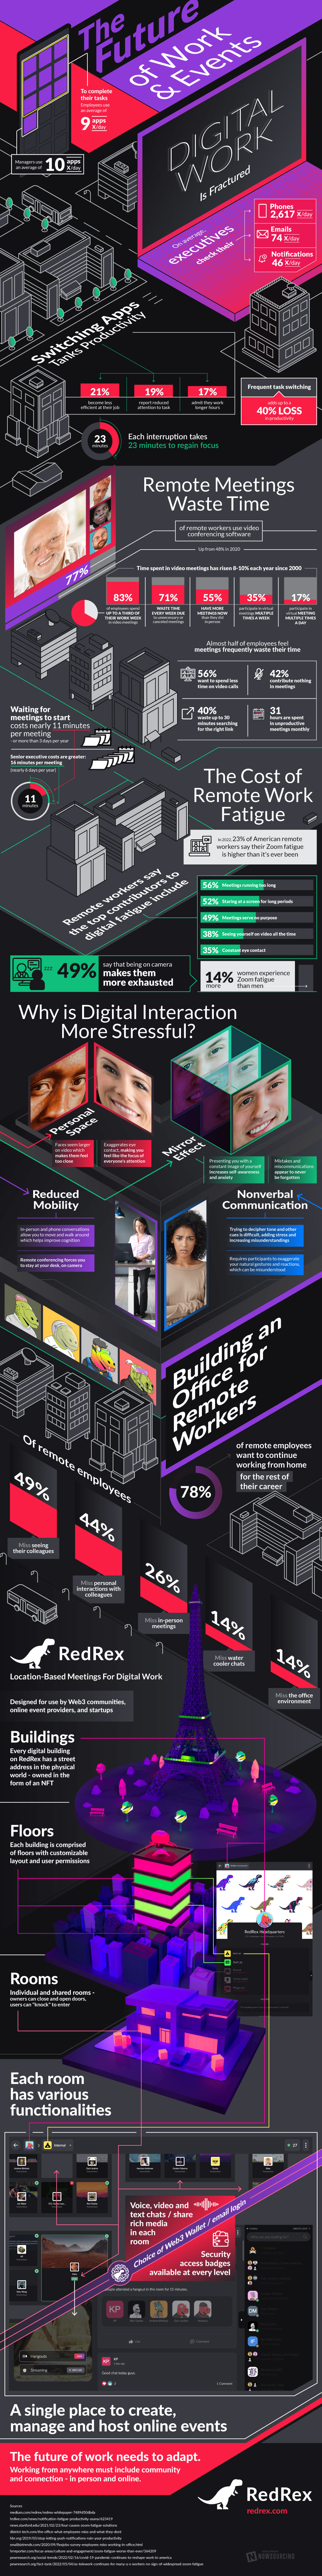 Infographic: The virtual office combines remote work with natural interactions